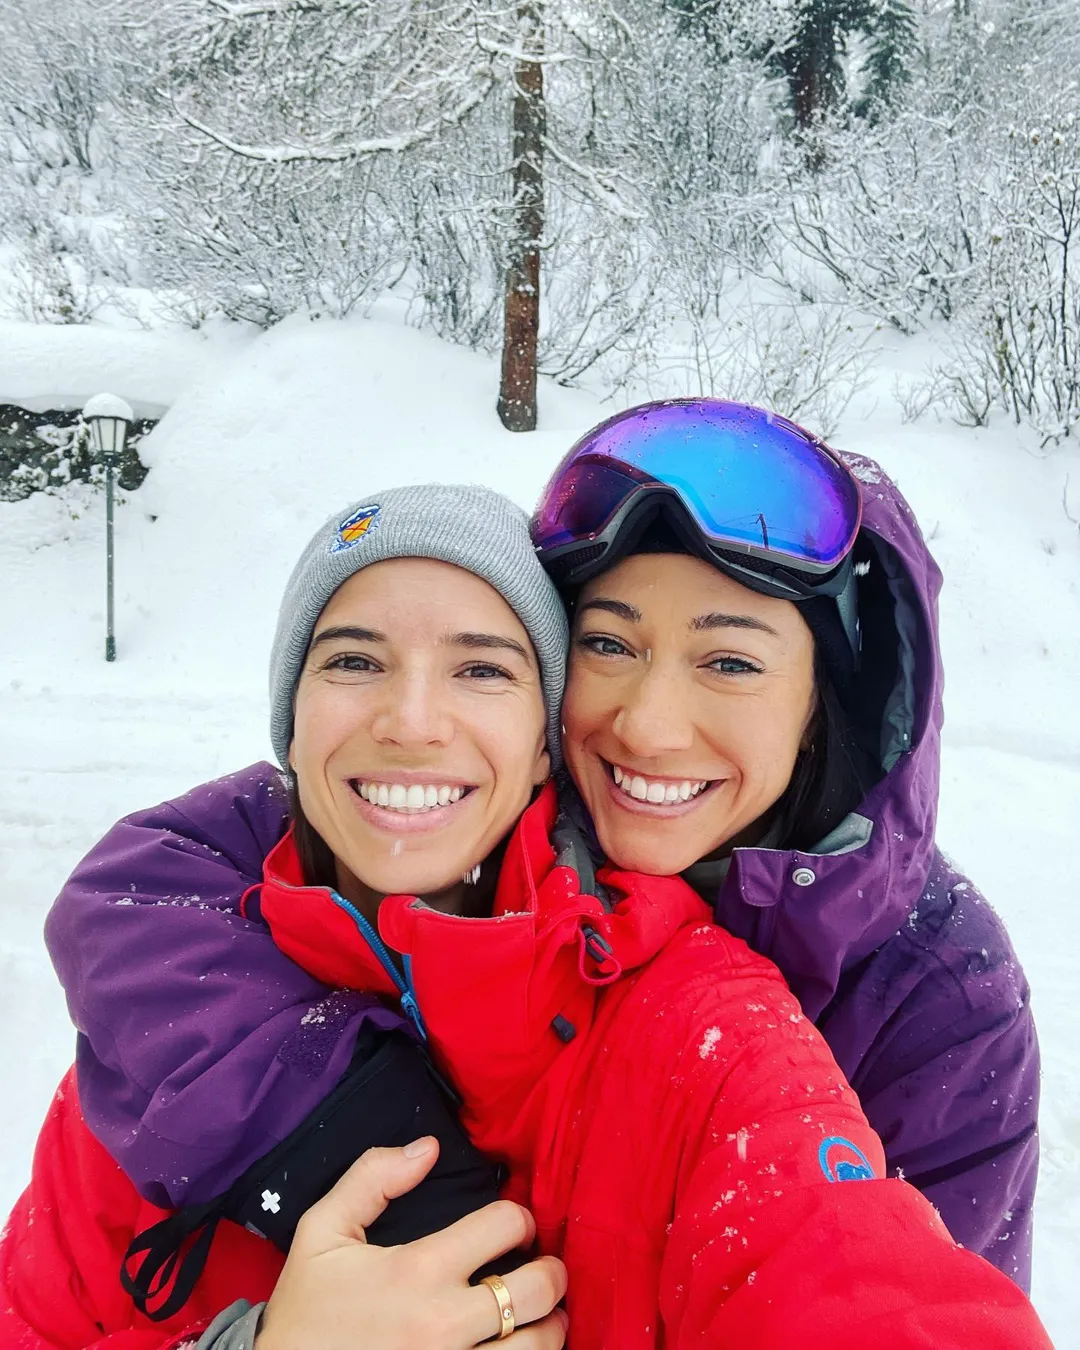 Tobin Heath is rumored to be dating her fellow USWNT teammate Christen Press